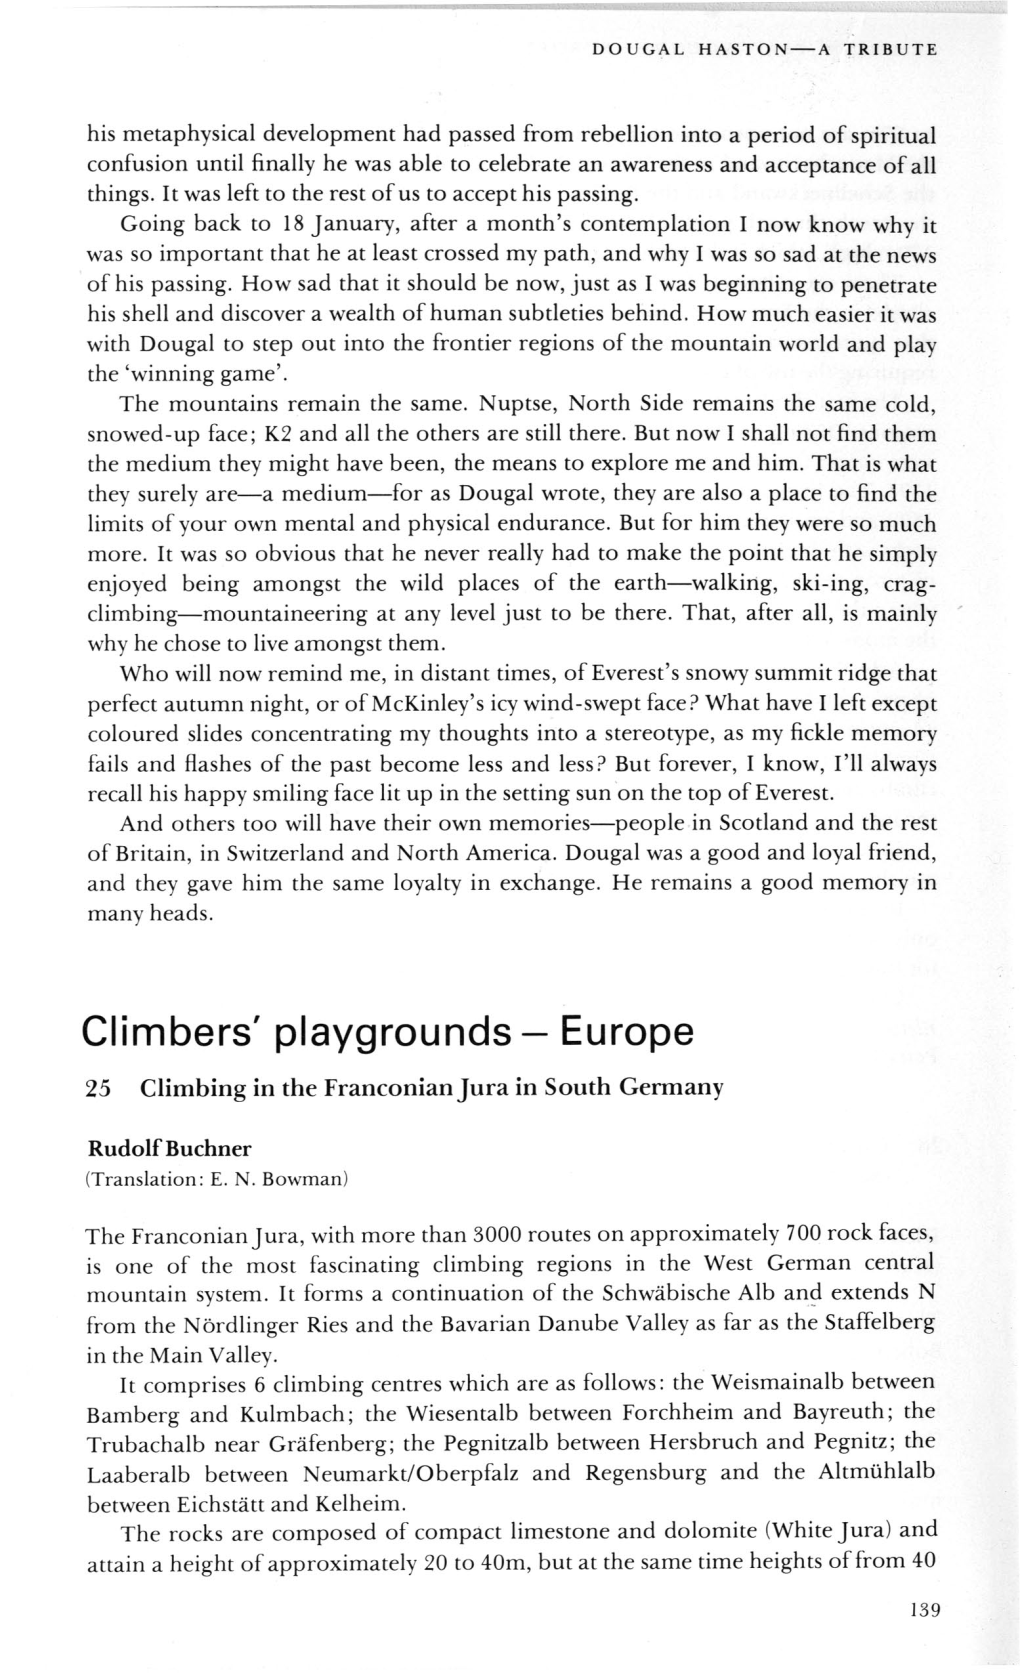 Climbers' Playgrounds - Europe 25 Climbing in the Franconianjura in South Germany